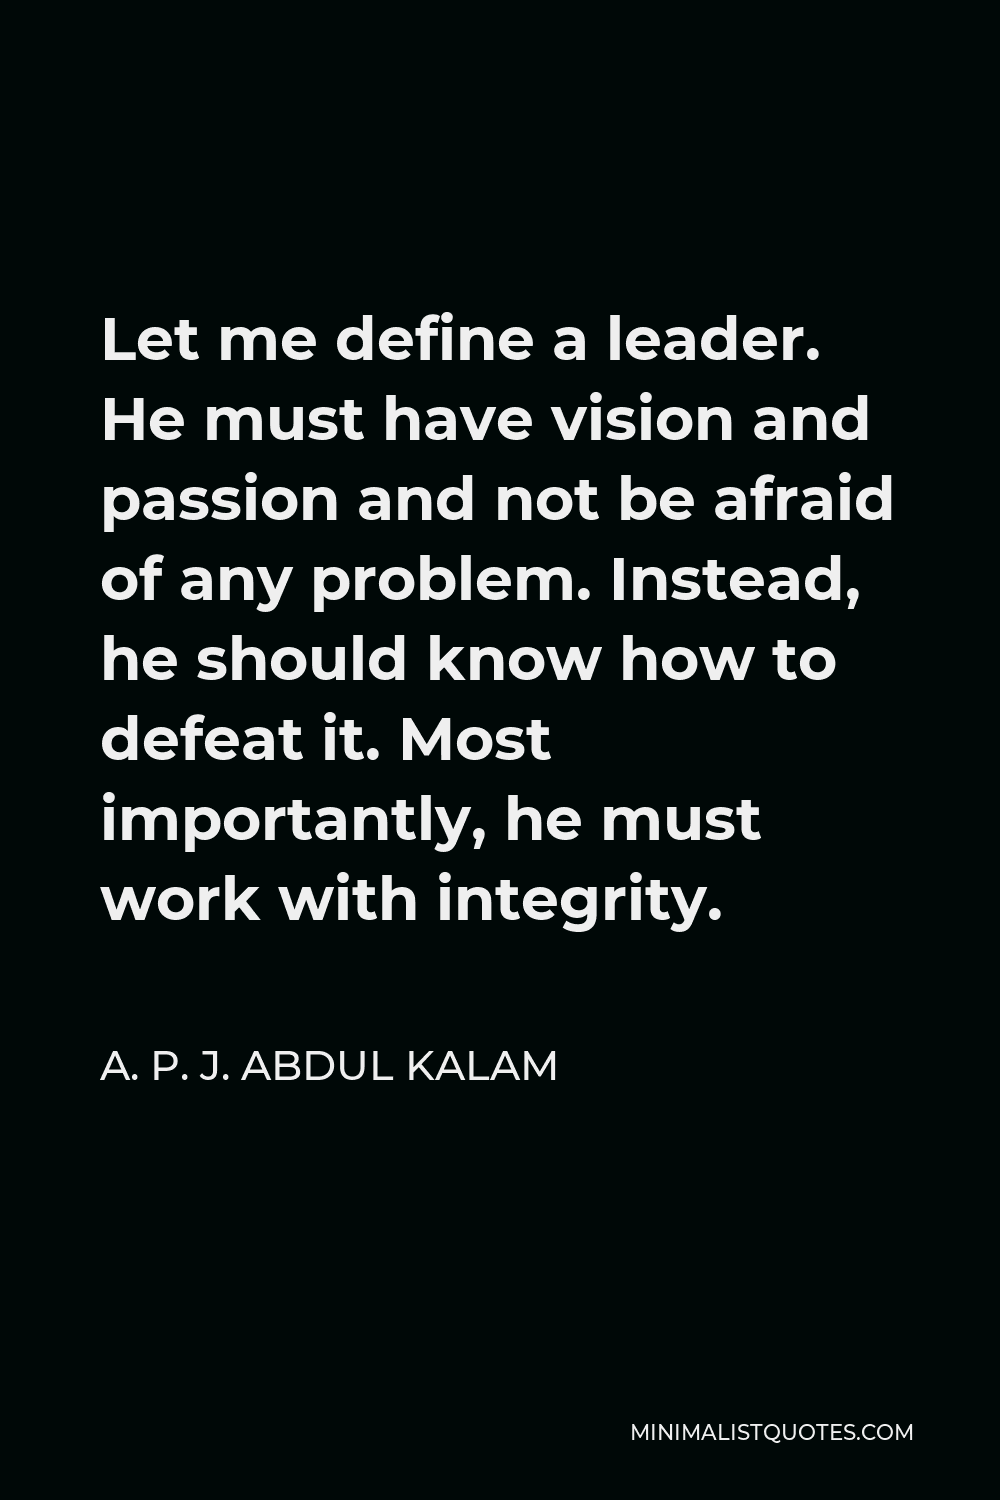 A. P. J. Abdul Kalam Quote - Let me define a leader. He must have vision and passion and not be afraid of any problem. Instead, he should know how to defeat it. Most importantly, he must work with integrity.